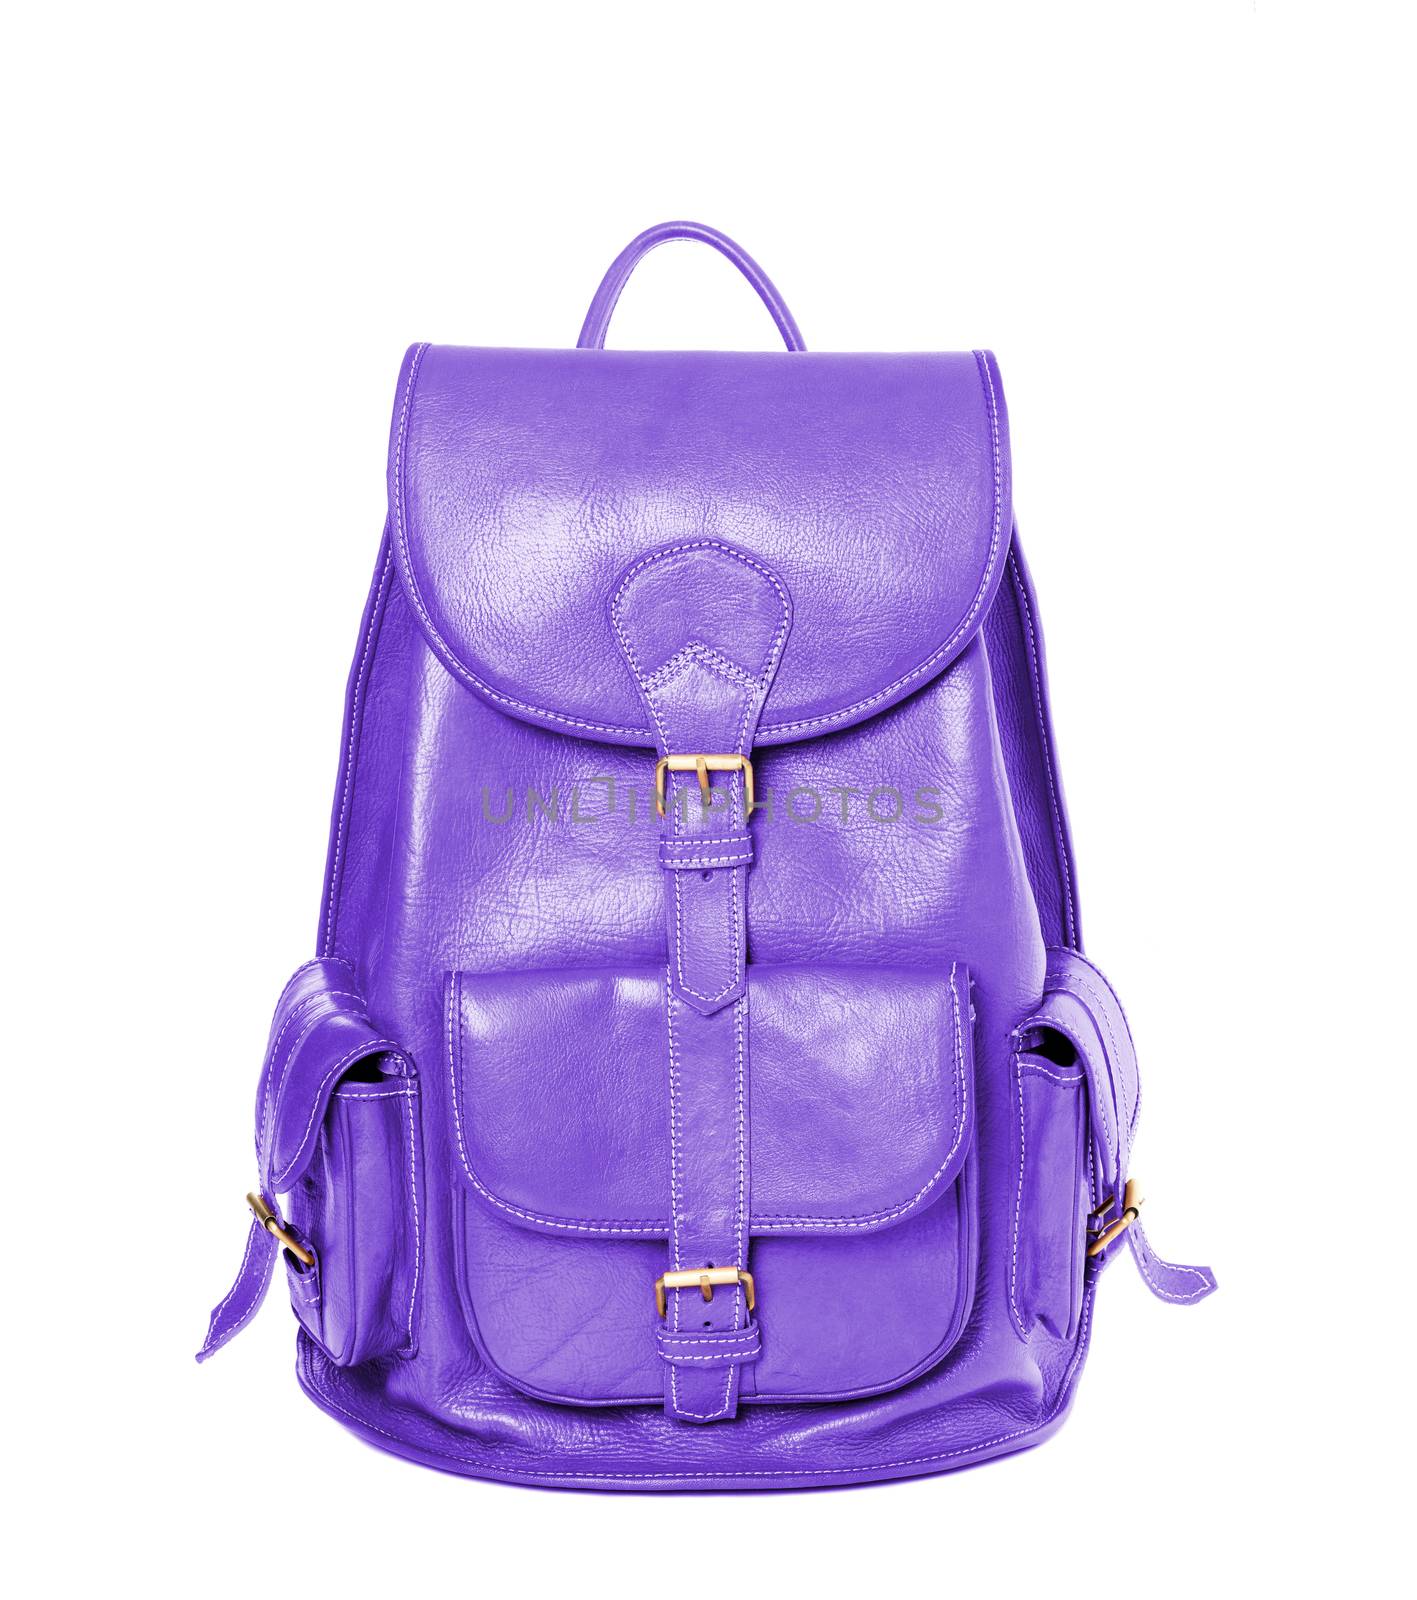 Purple color leather backpack standing isolated on white background